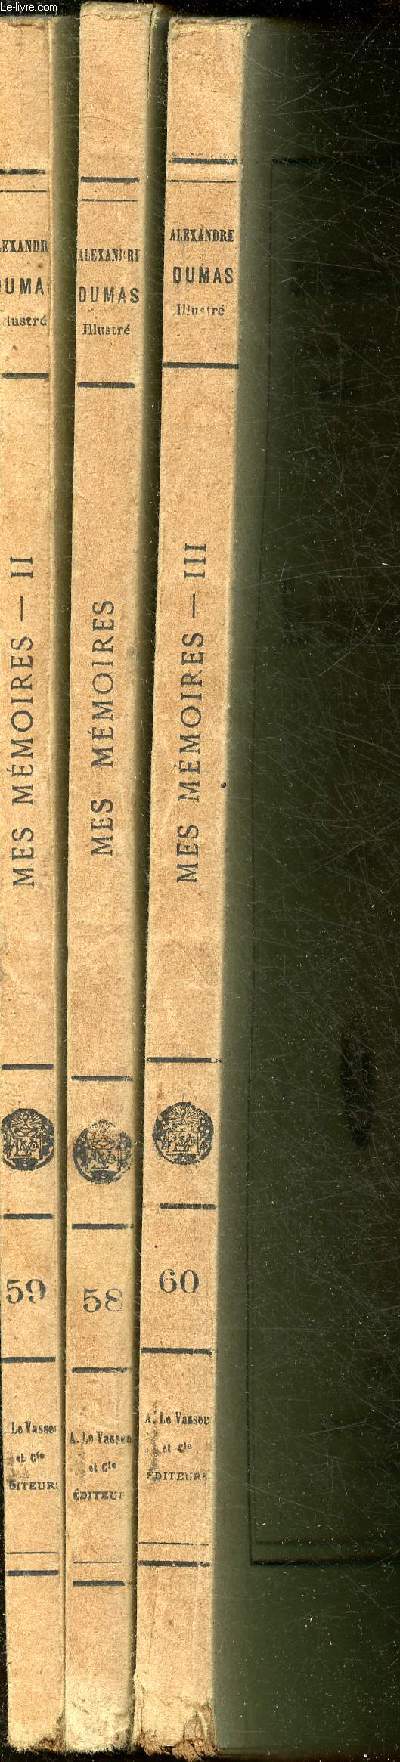 Mes Mmoires Tomes I, II et III (En 3 volumes) (Collection 